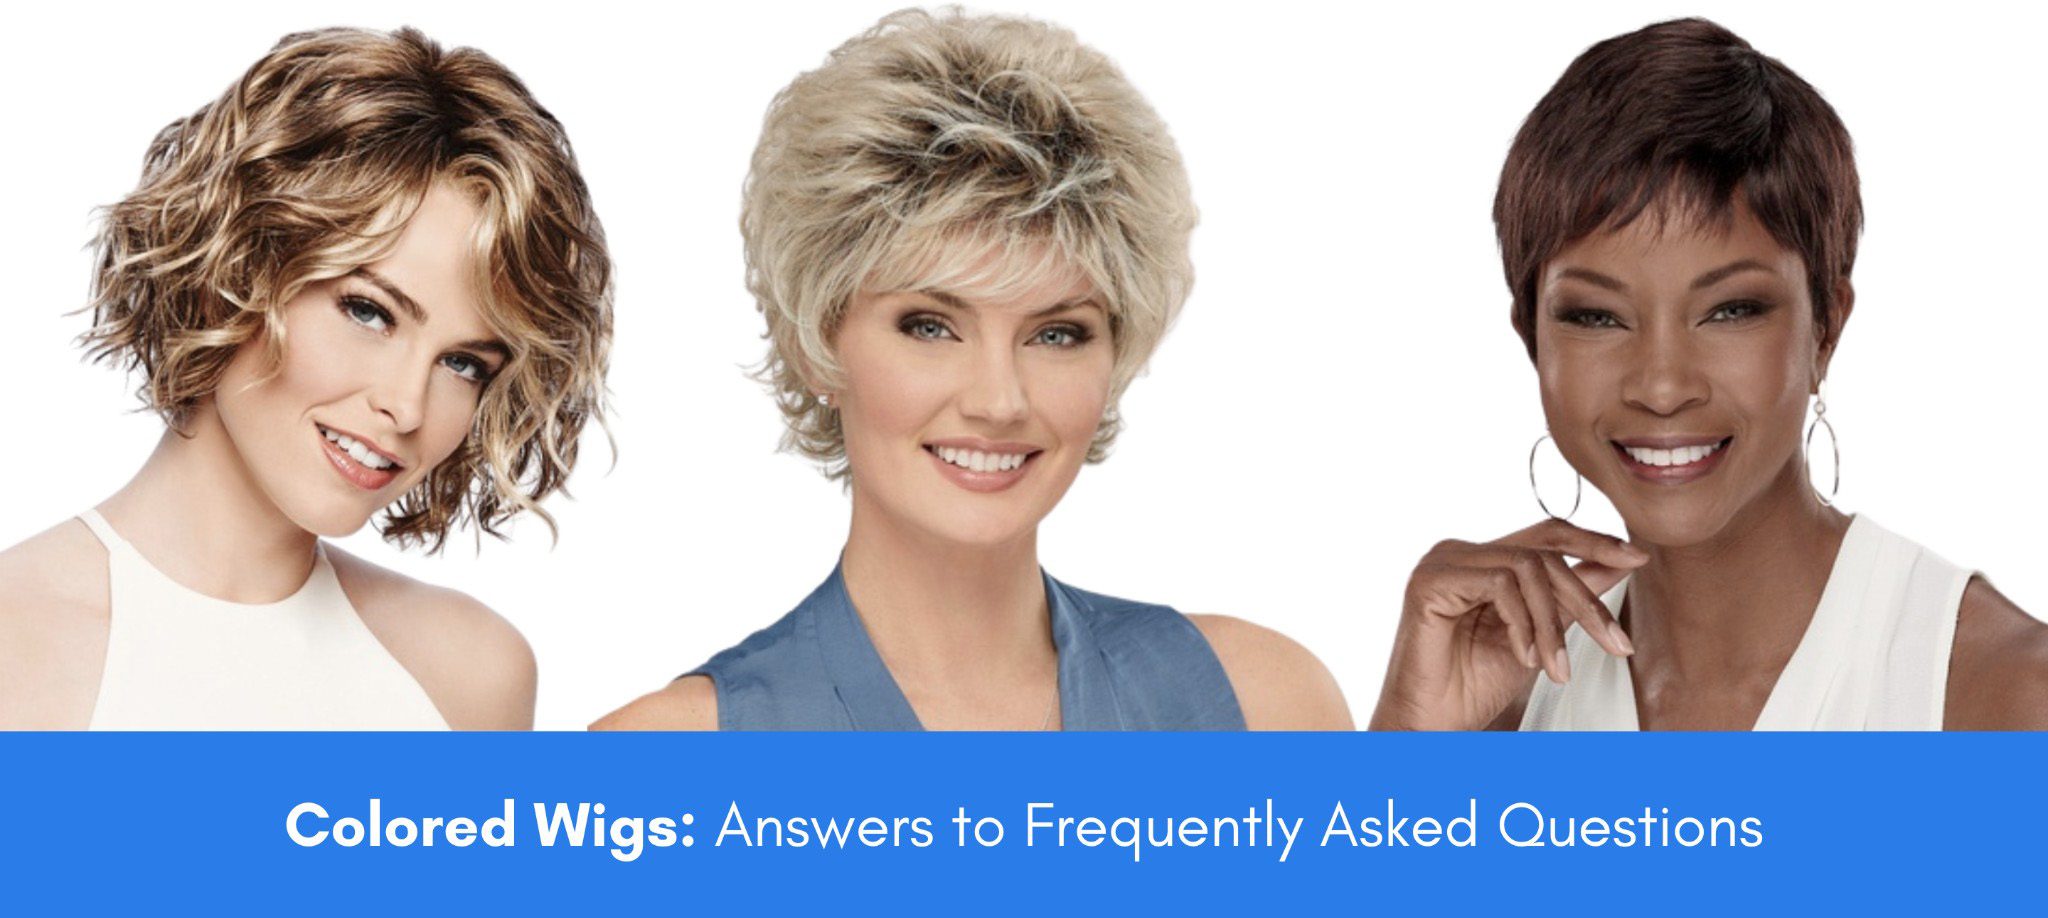 colored wigs: answers to frequently asked questions